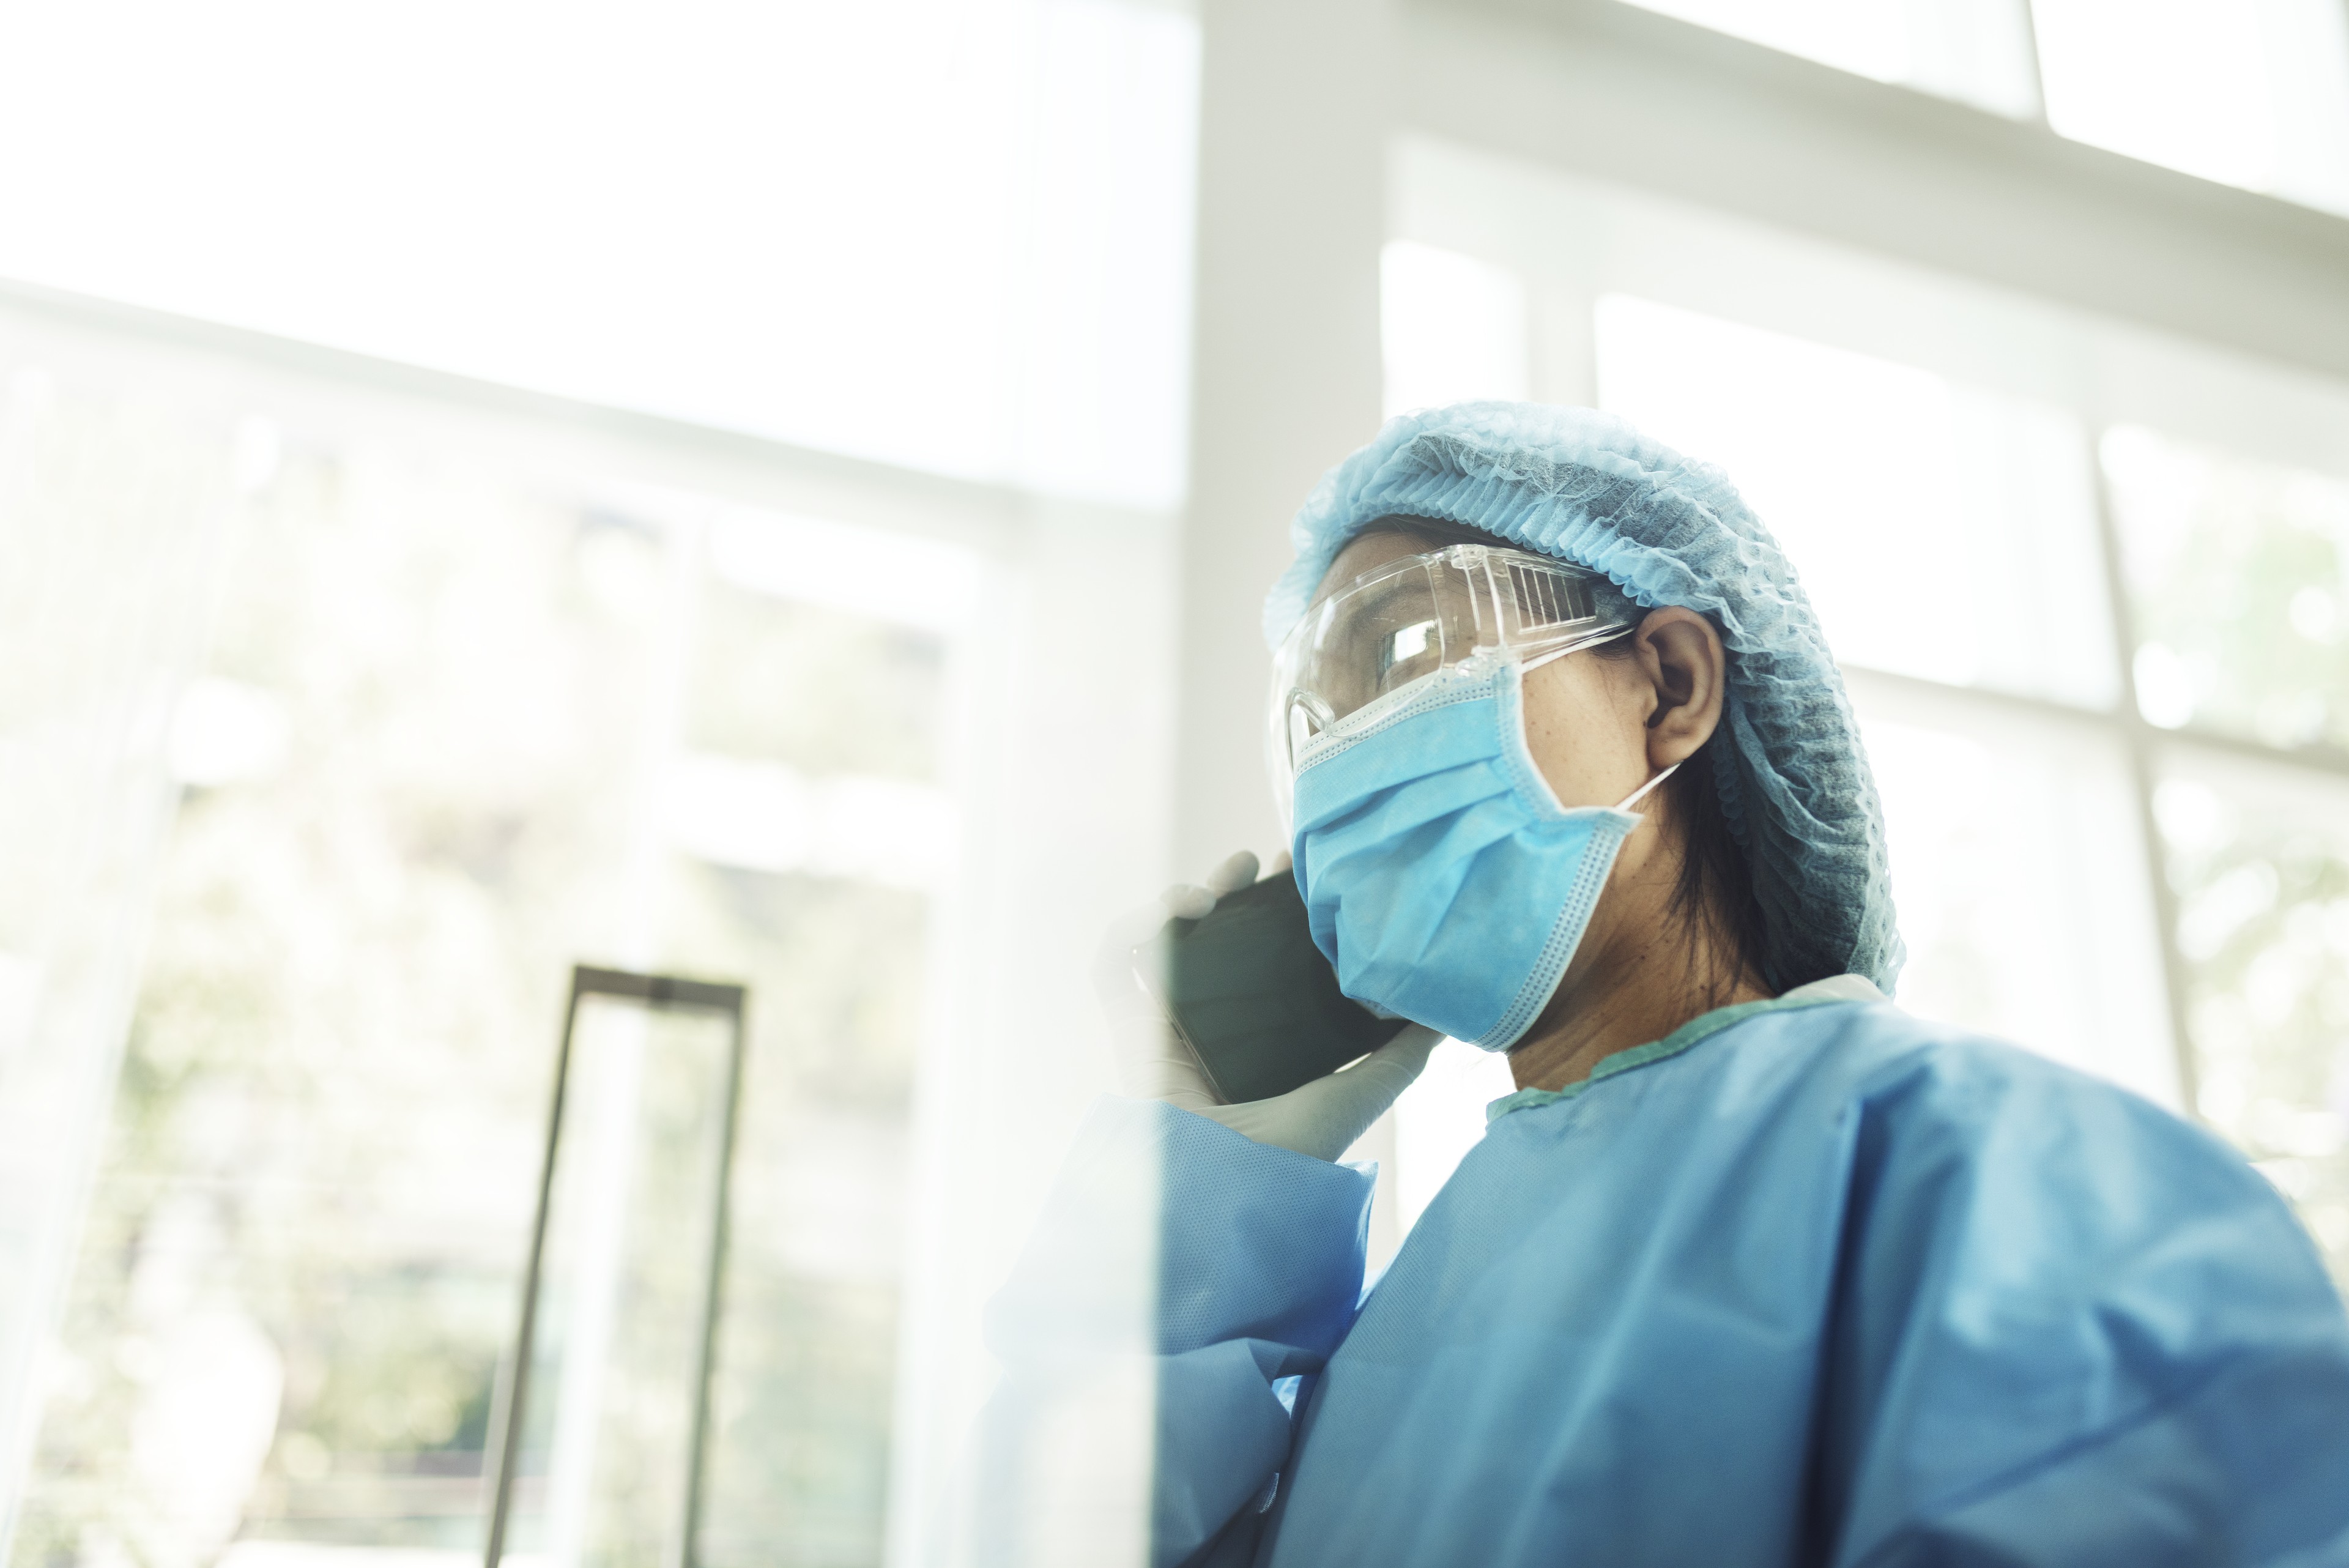 Stock photo of person in medical scrubs, mask, and goggles